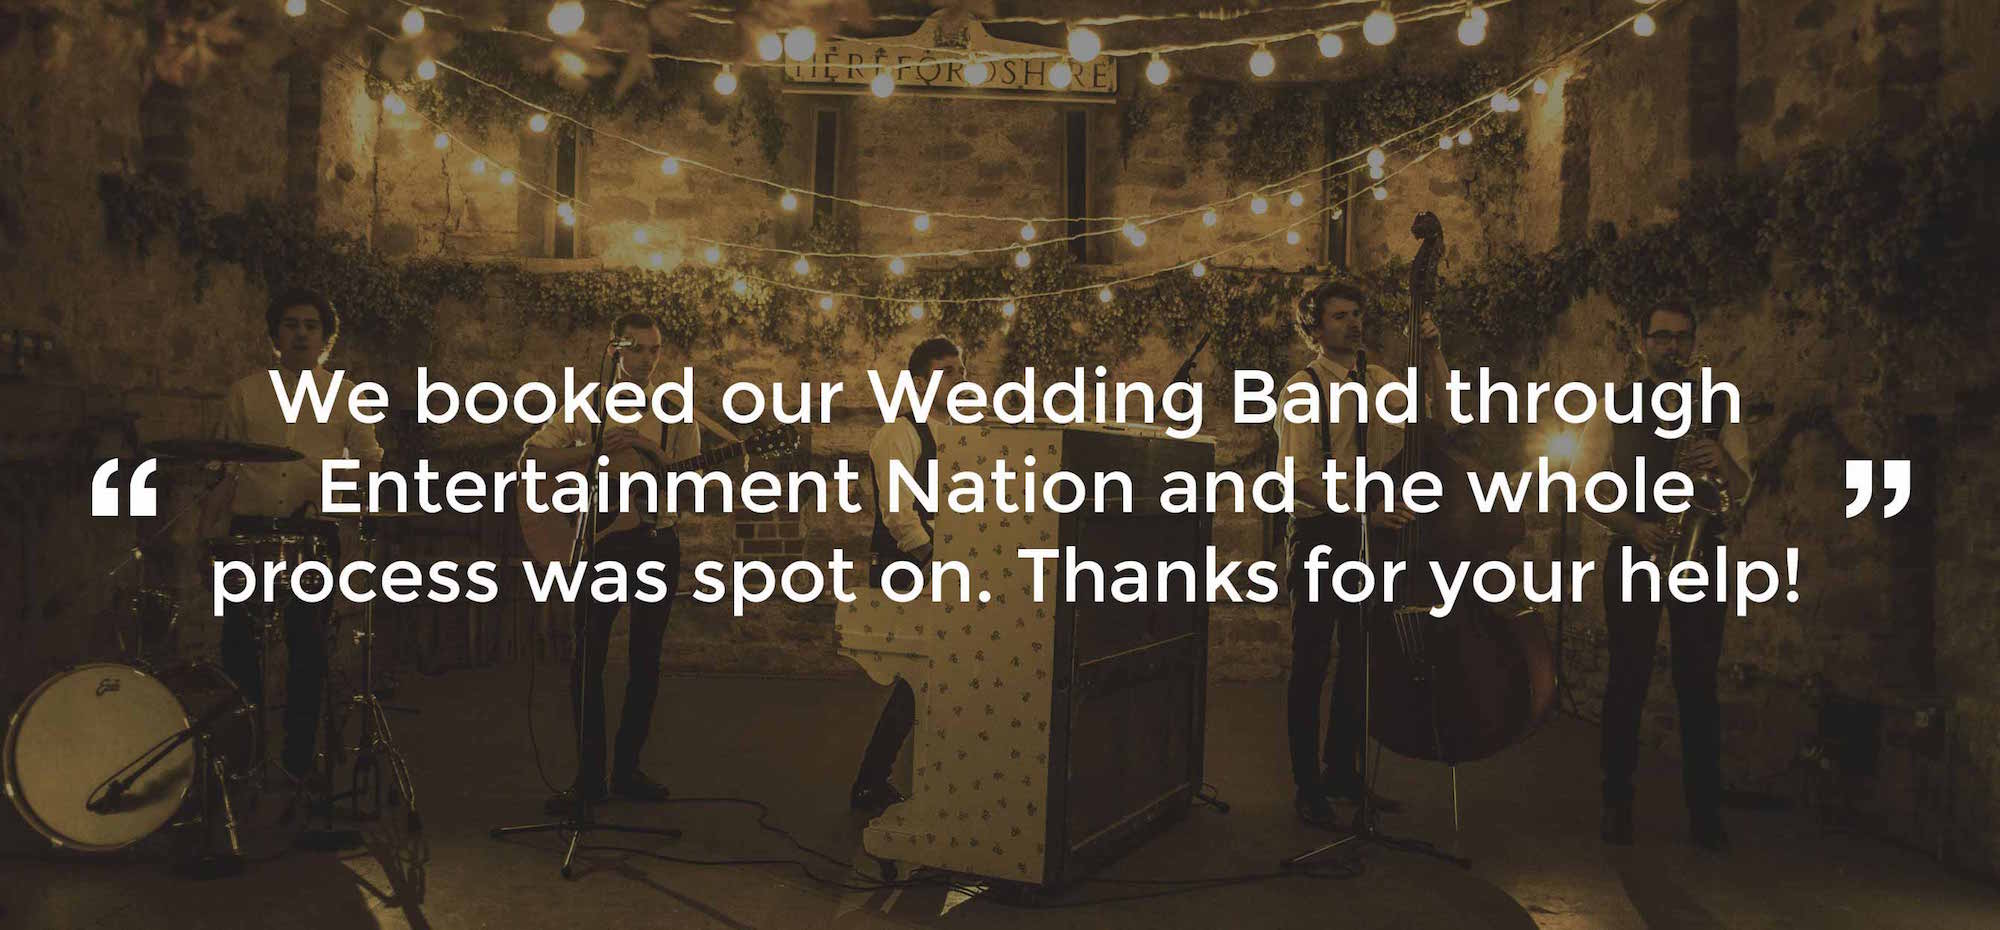 Review of Wedding Band Liverpool